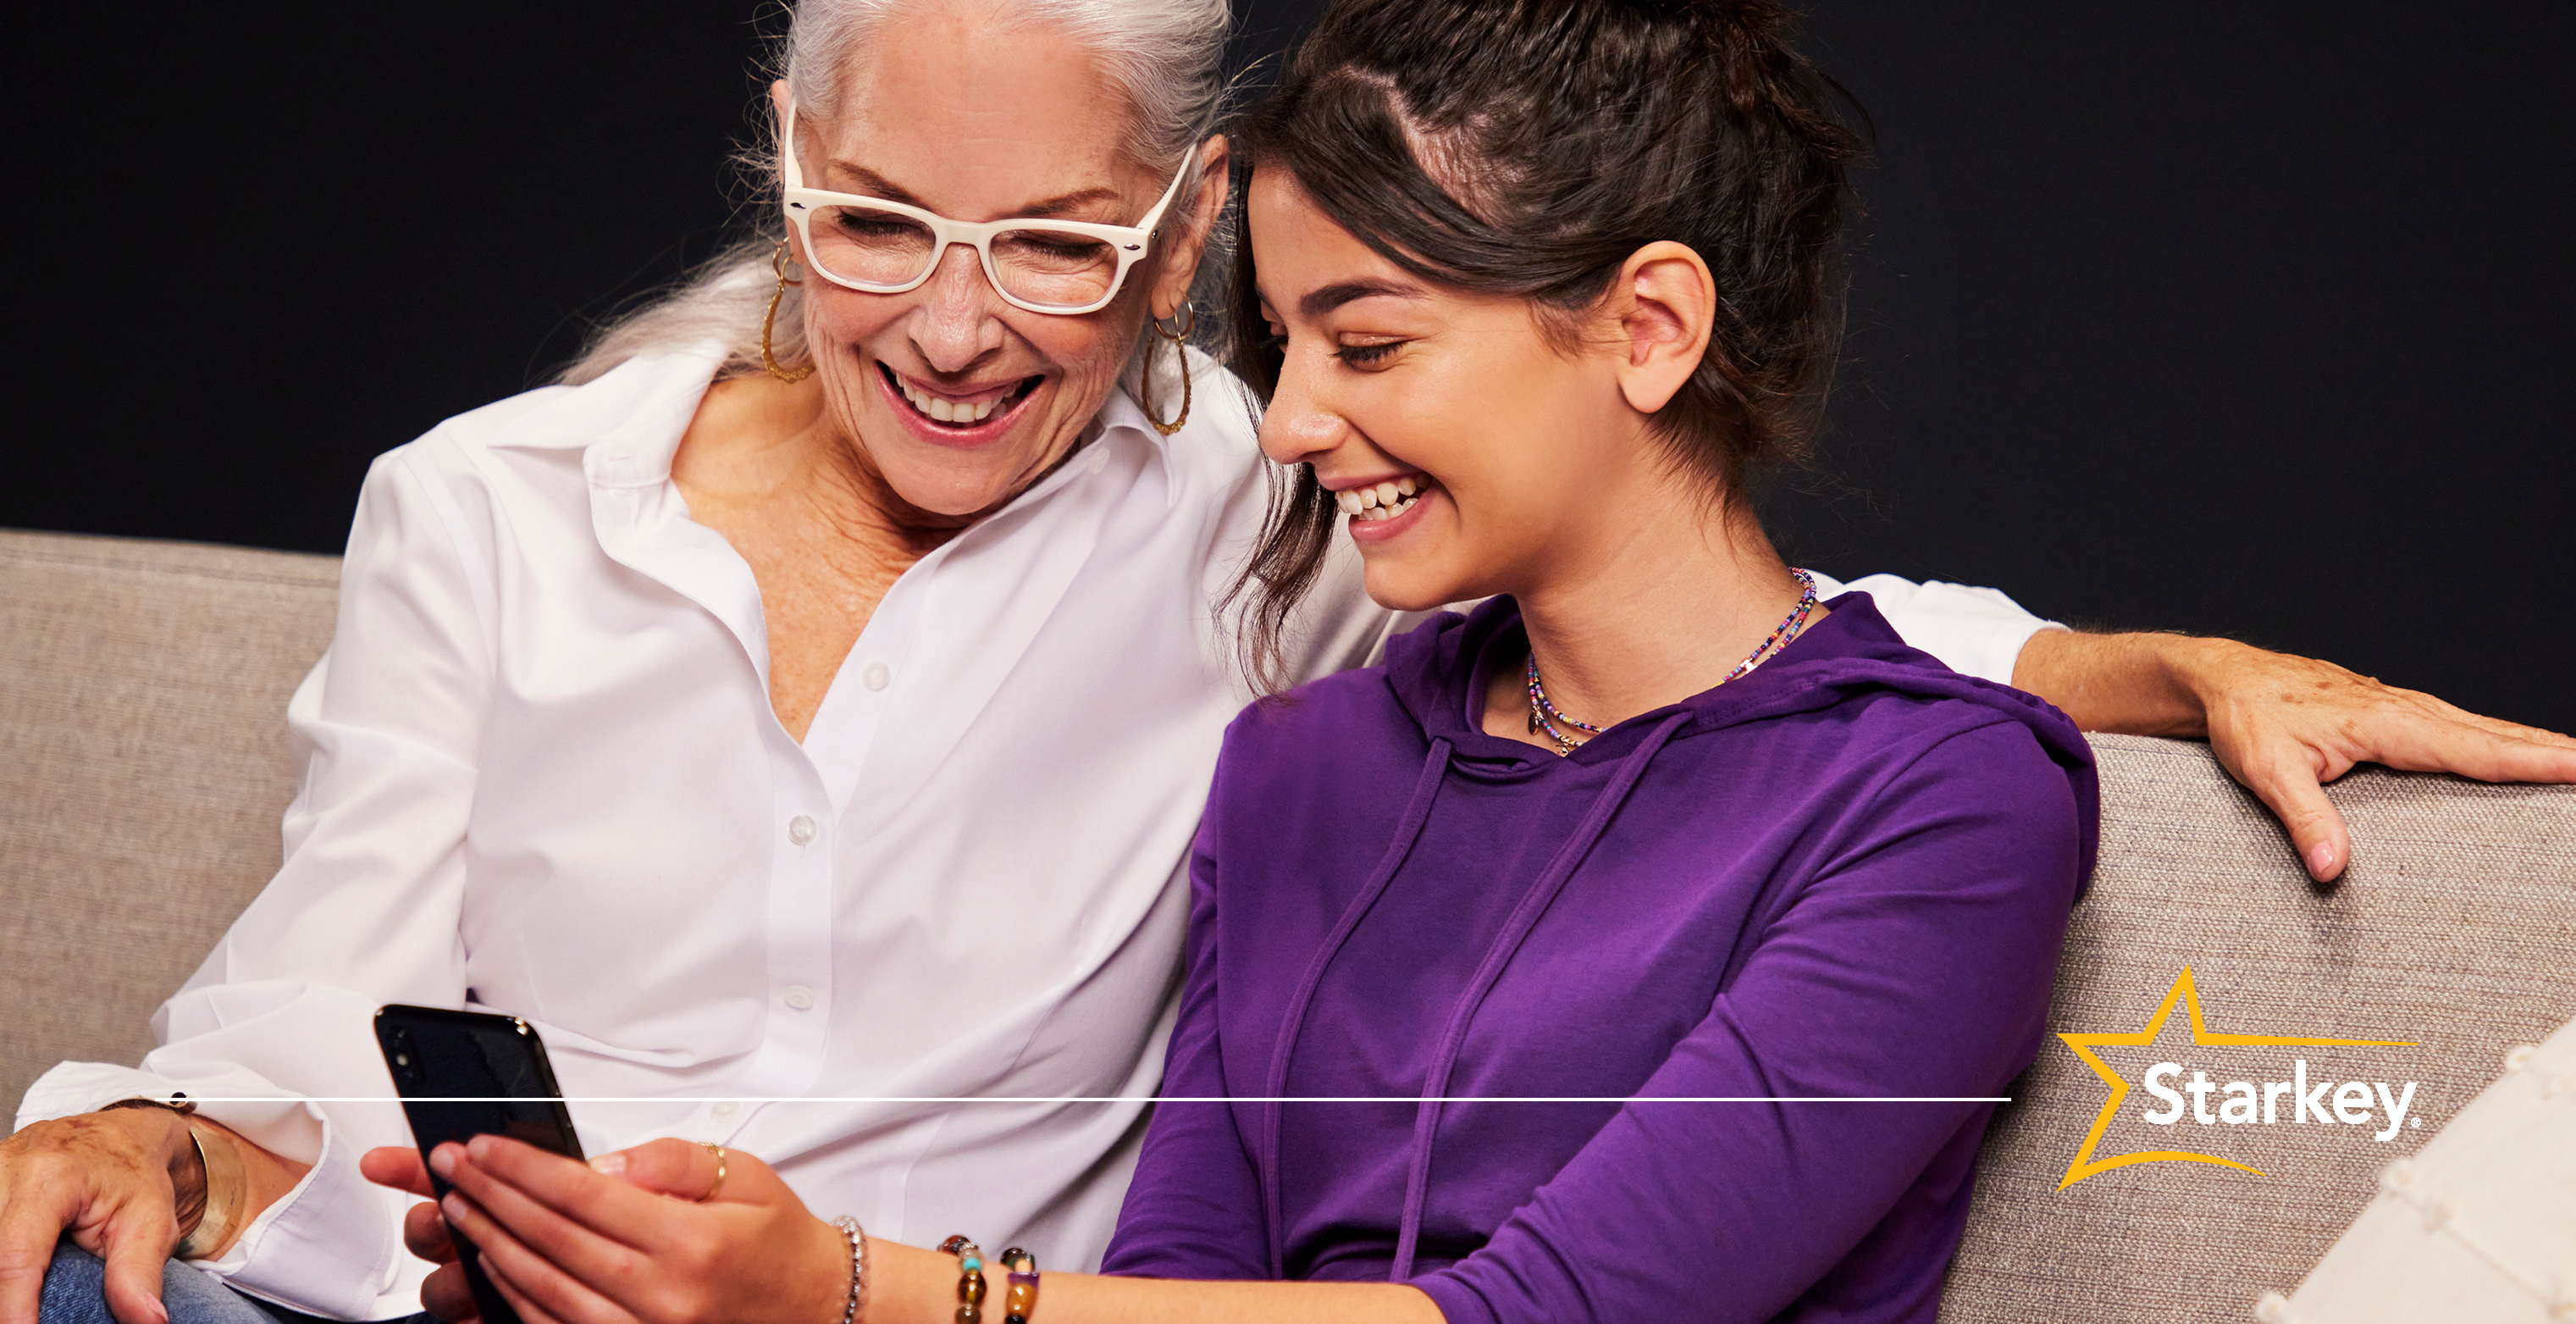 Senior woman sitting on a couch with arm around younger woman looking at smartphone